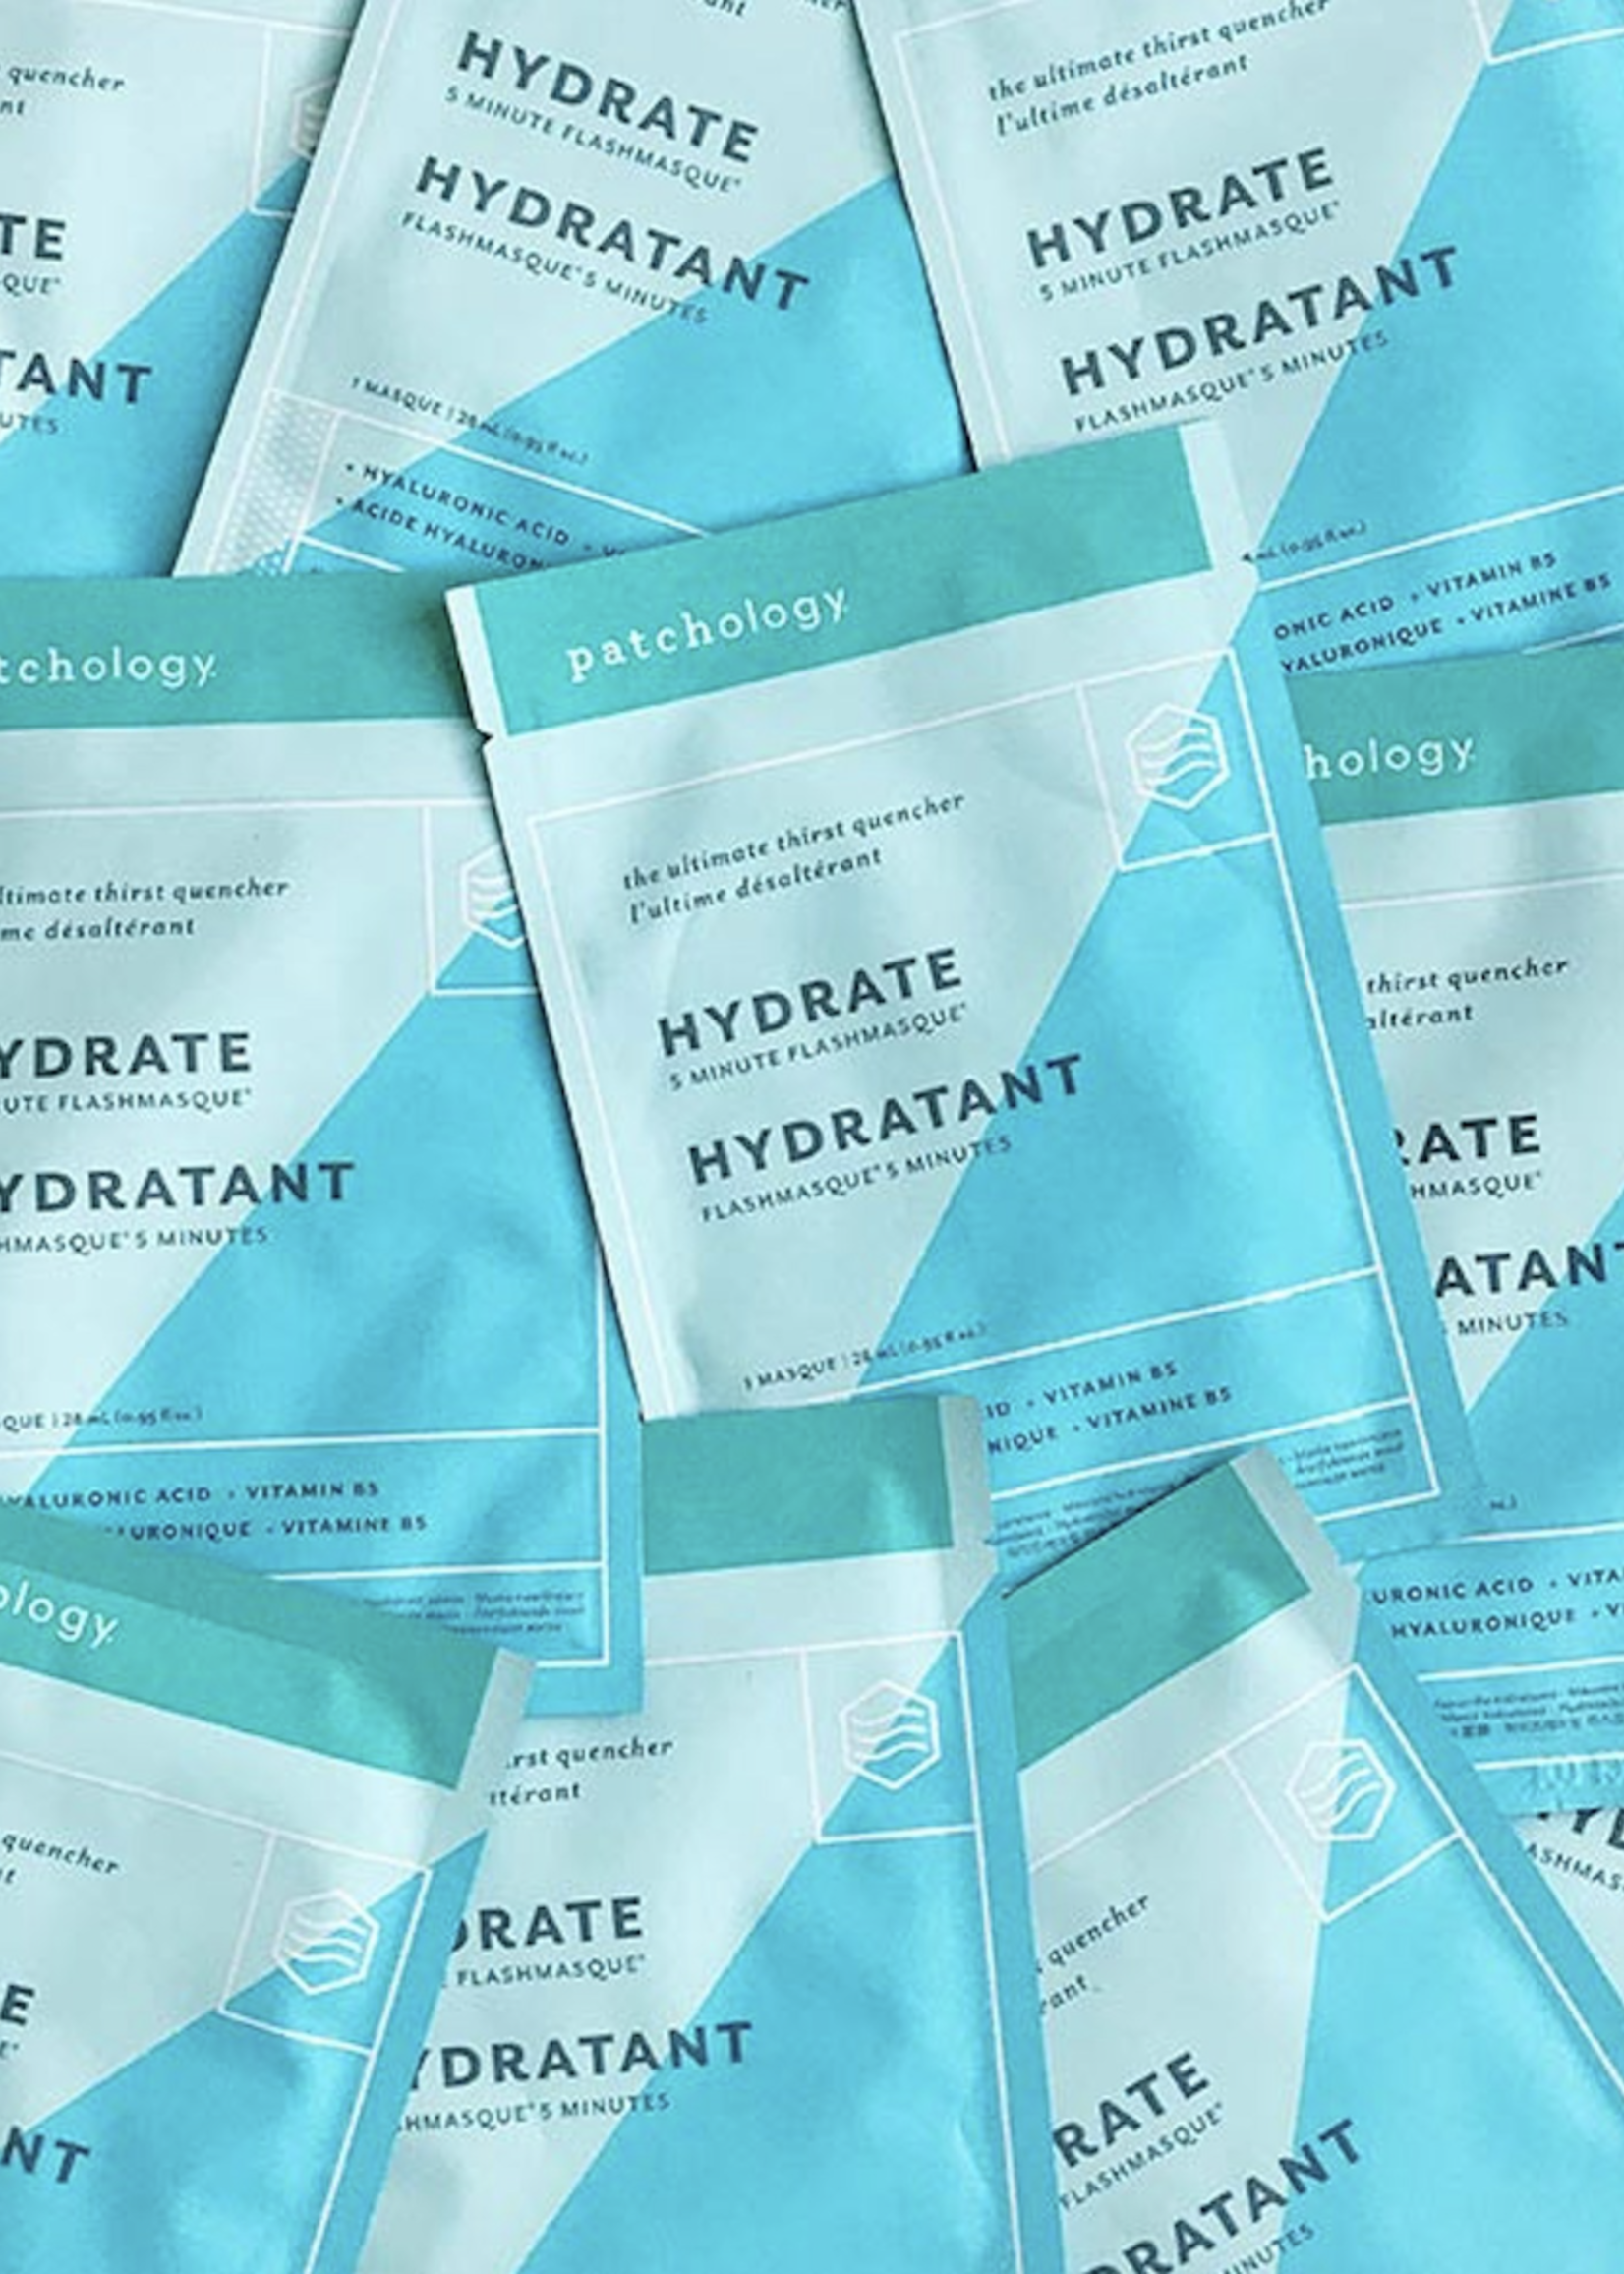 Patchology FlashMasque Hydrate | 5 Minute Sheet Mask